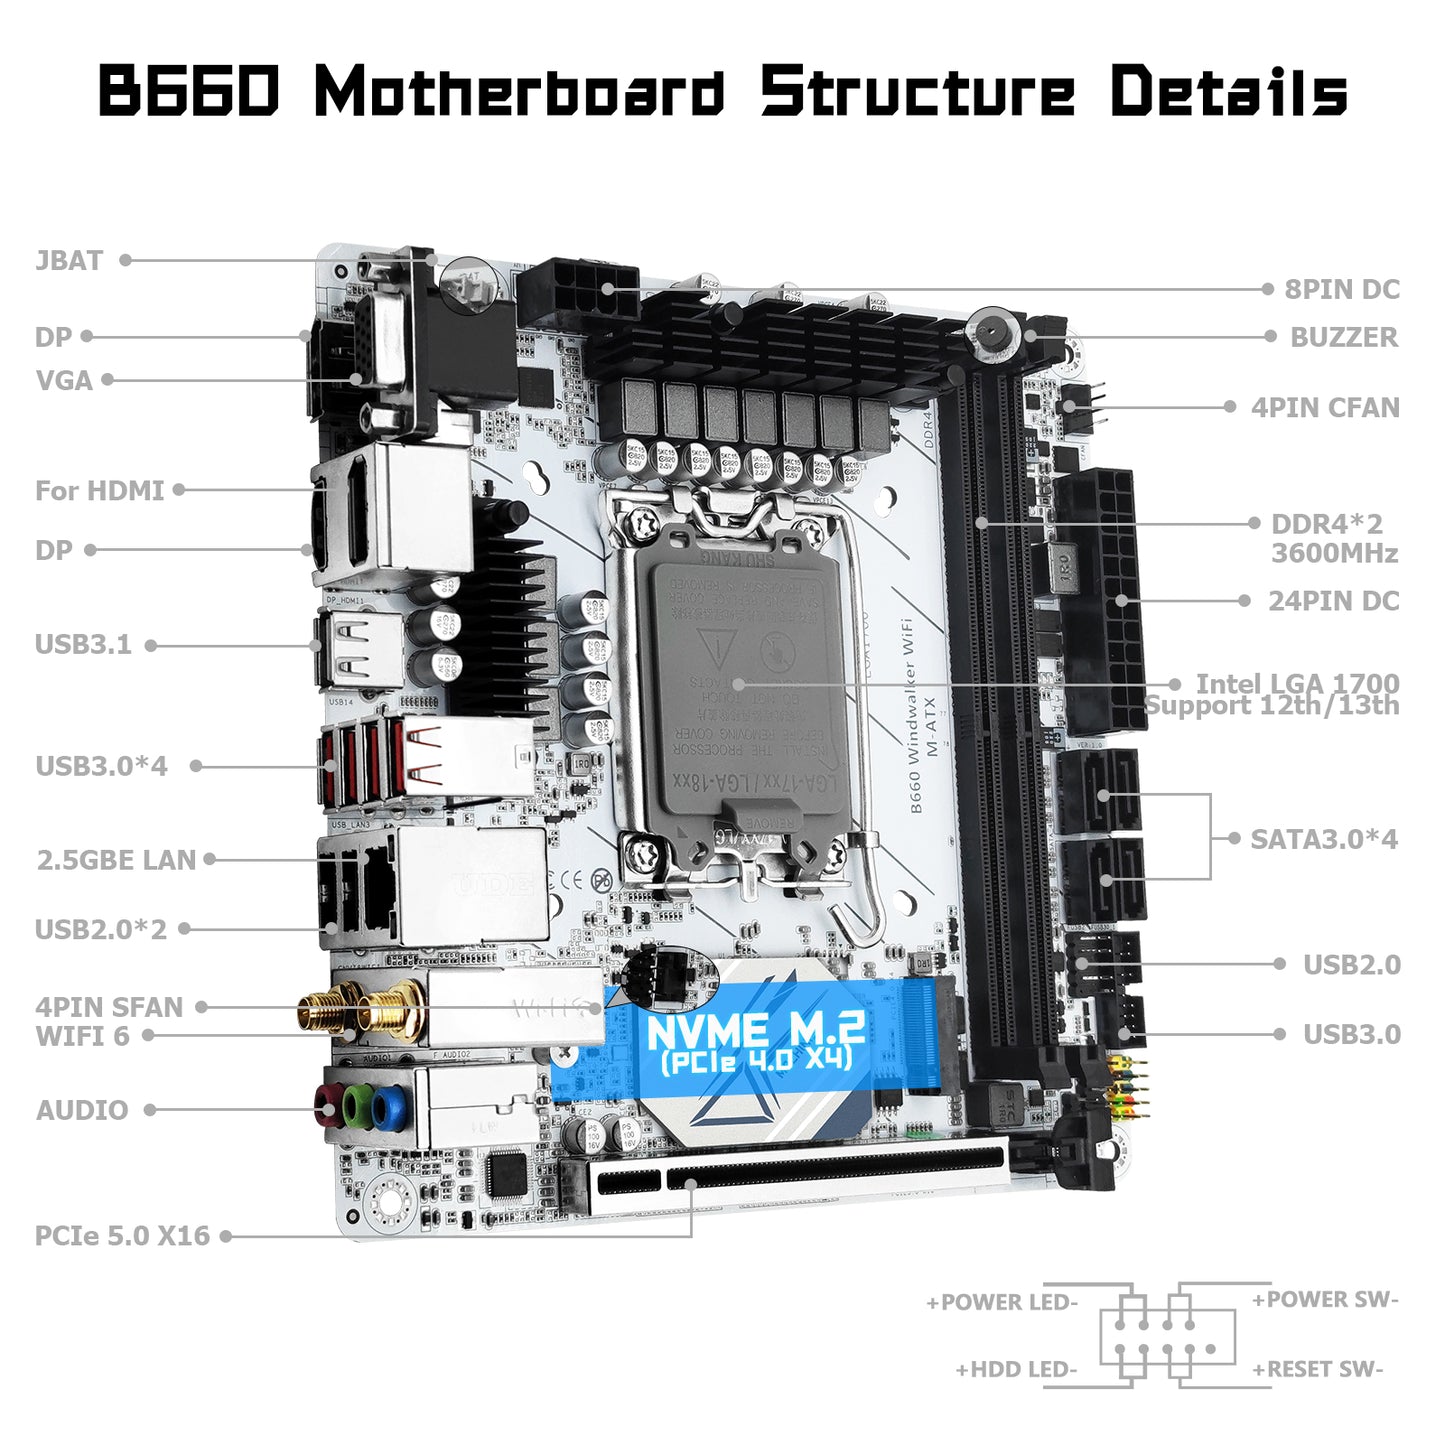 MACHINIST B660 Gaming Motherboard, LGA 1700 (Intel 12/13th) PC Motherboard (ITX, PCIe 4.0, NVME M.2, DDR4, 2.5G LAN, Compatible with HDMI/DP/VGA, Wi-Fi 6) Computer Motherboards